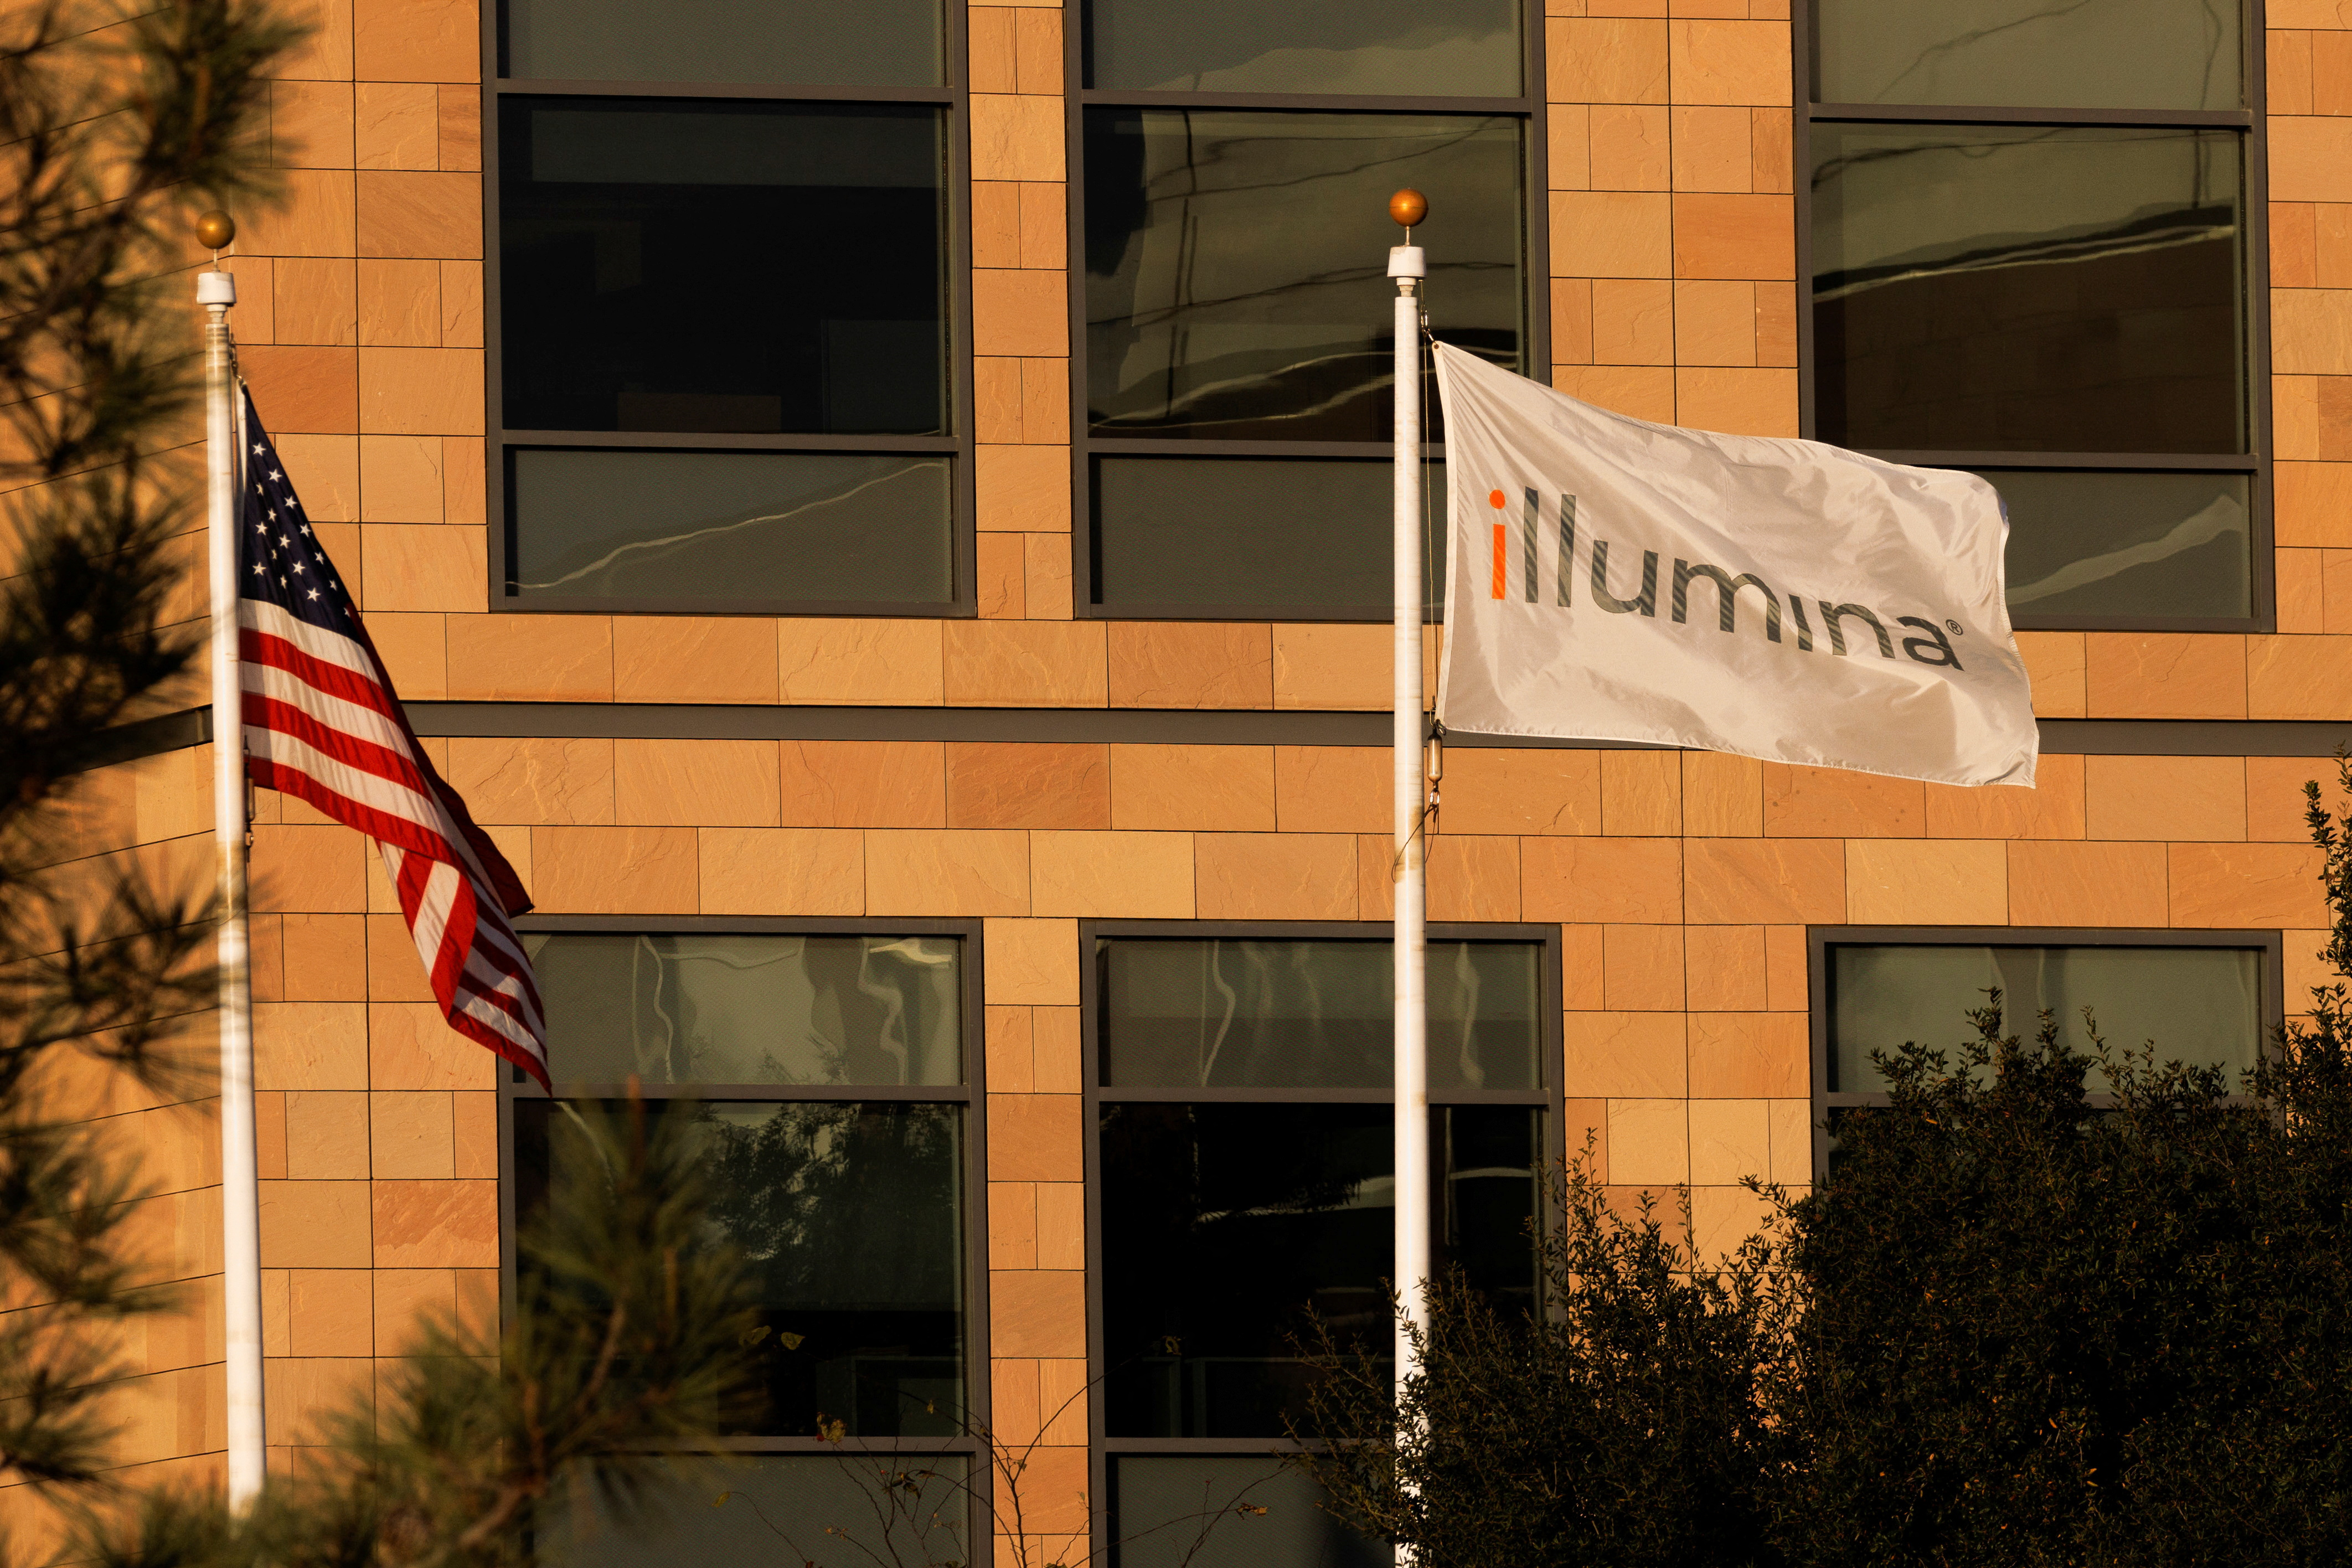 Flags wave in front of Illumina's global headquarters in San Diego, California